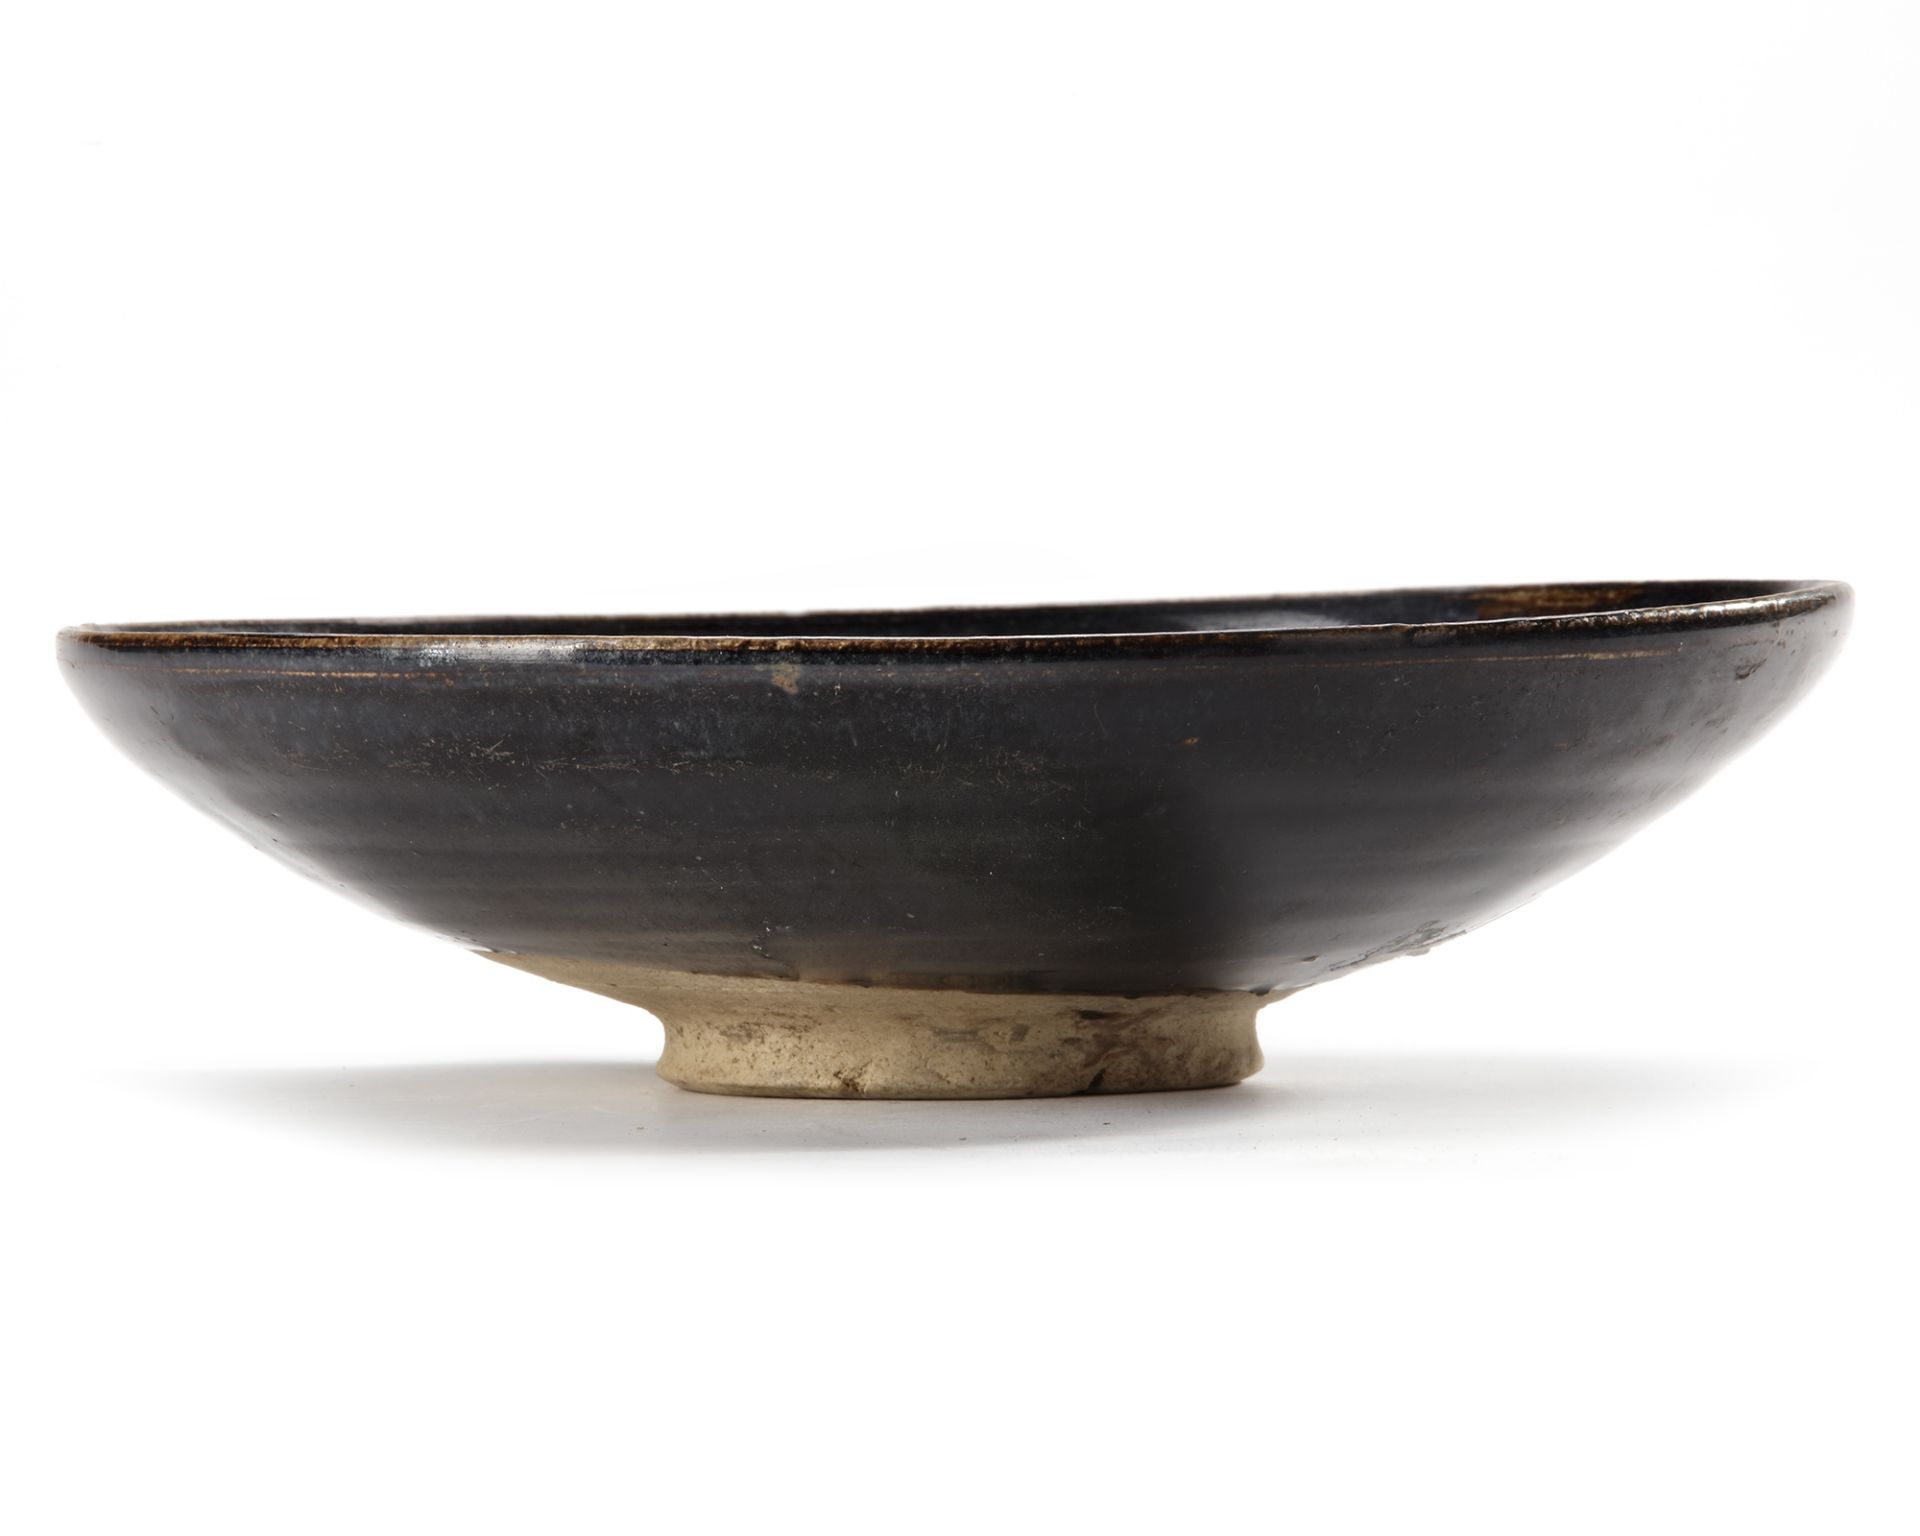 A CHINESE HENAN RUSSET PAINTED BLACK GLAZED BOWL, JIN DYNASTY (1115-1234) - Image 3 of 5